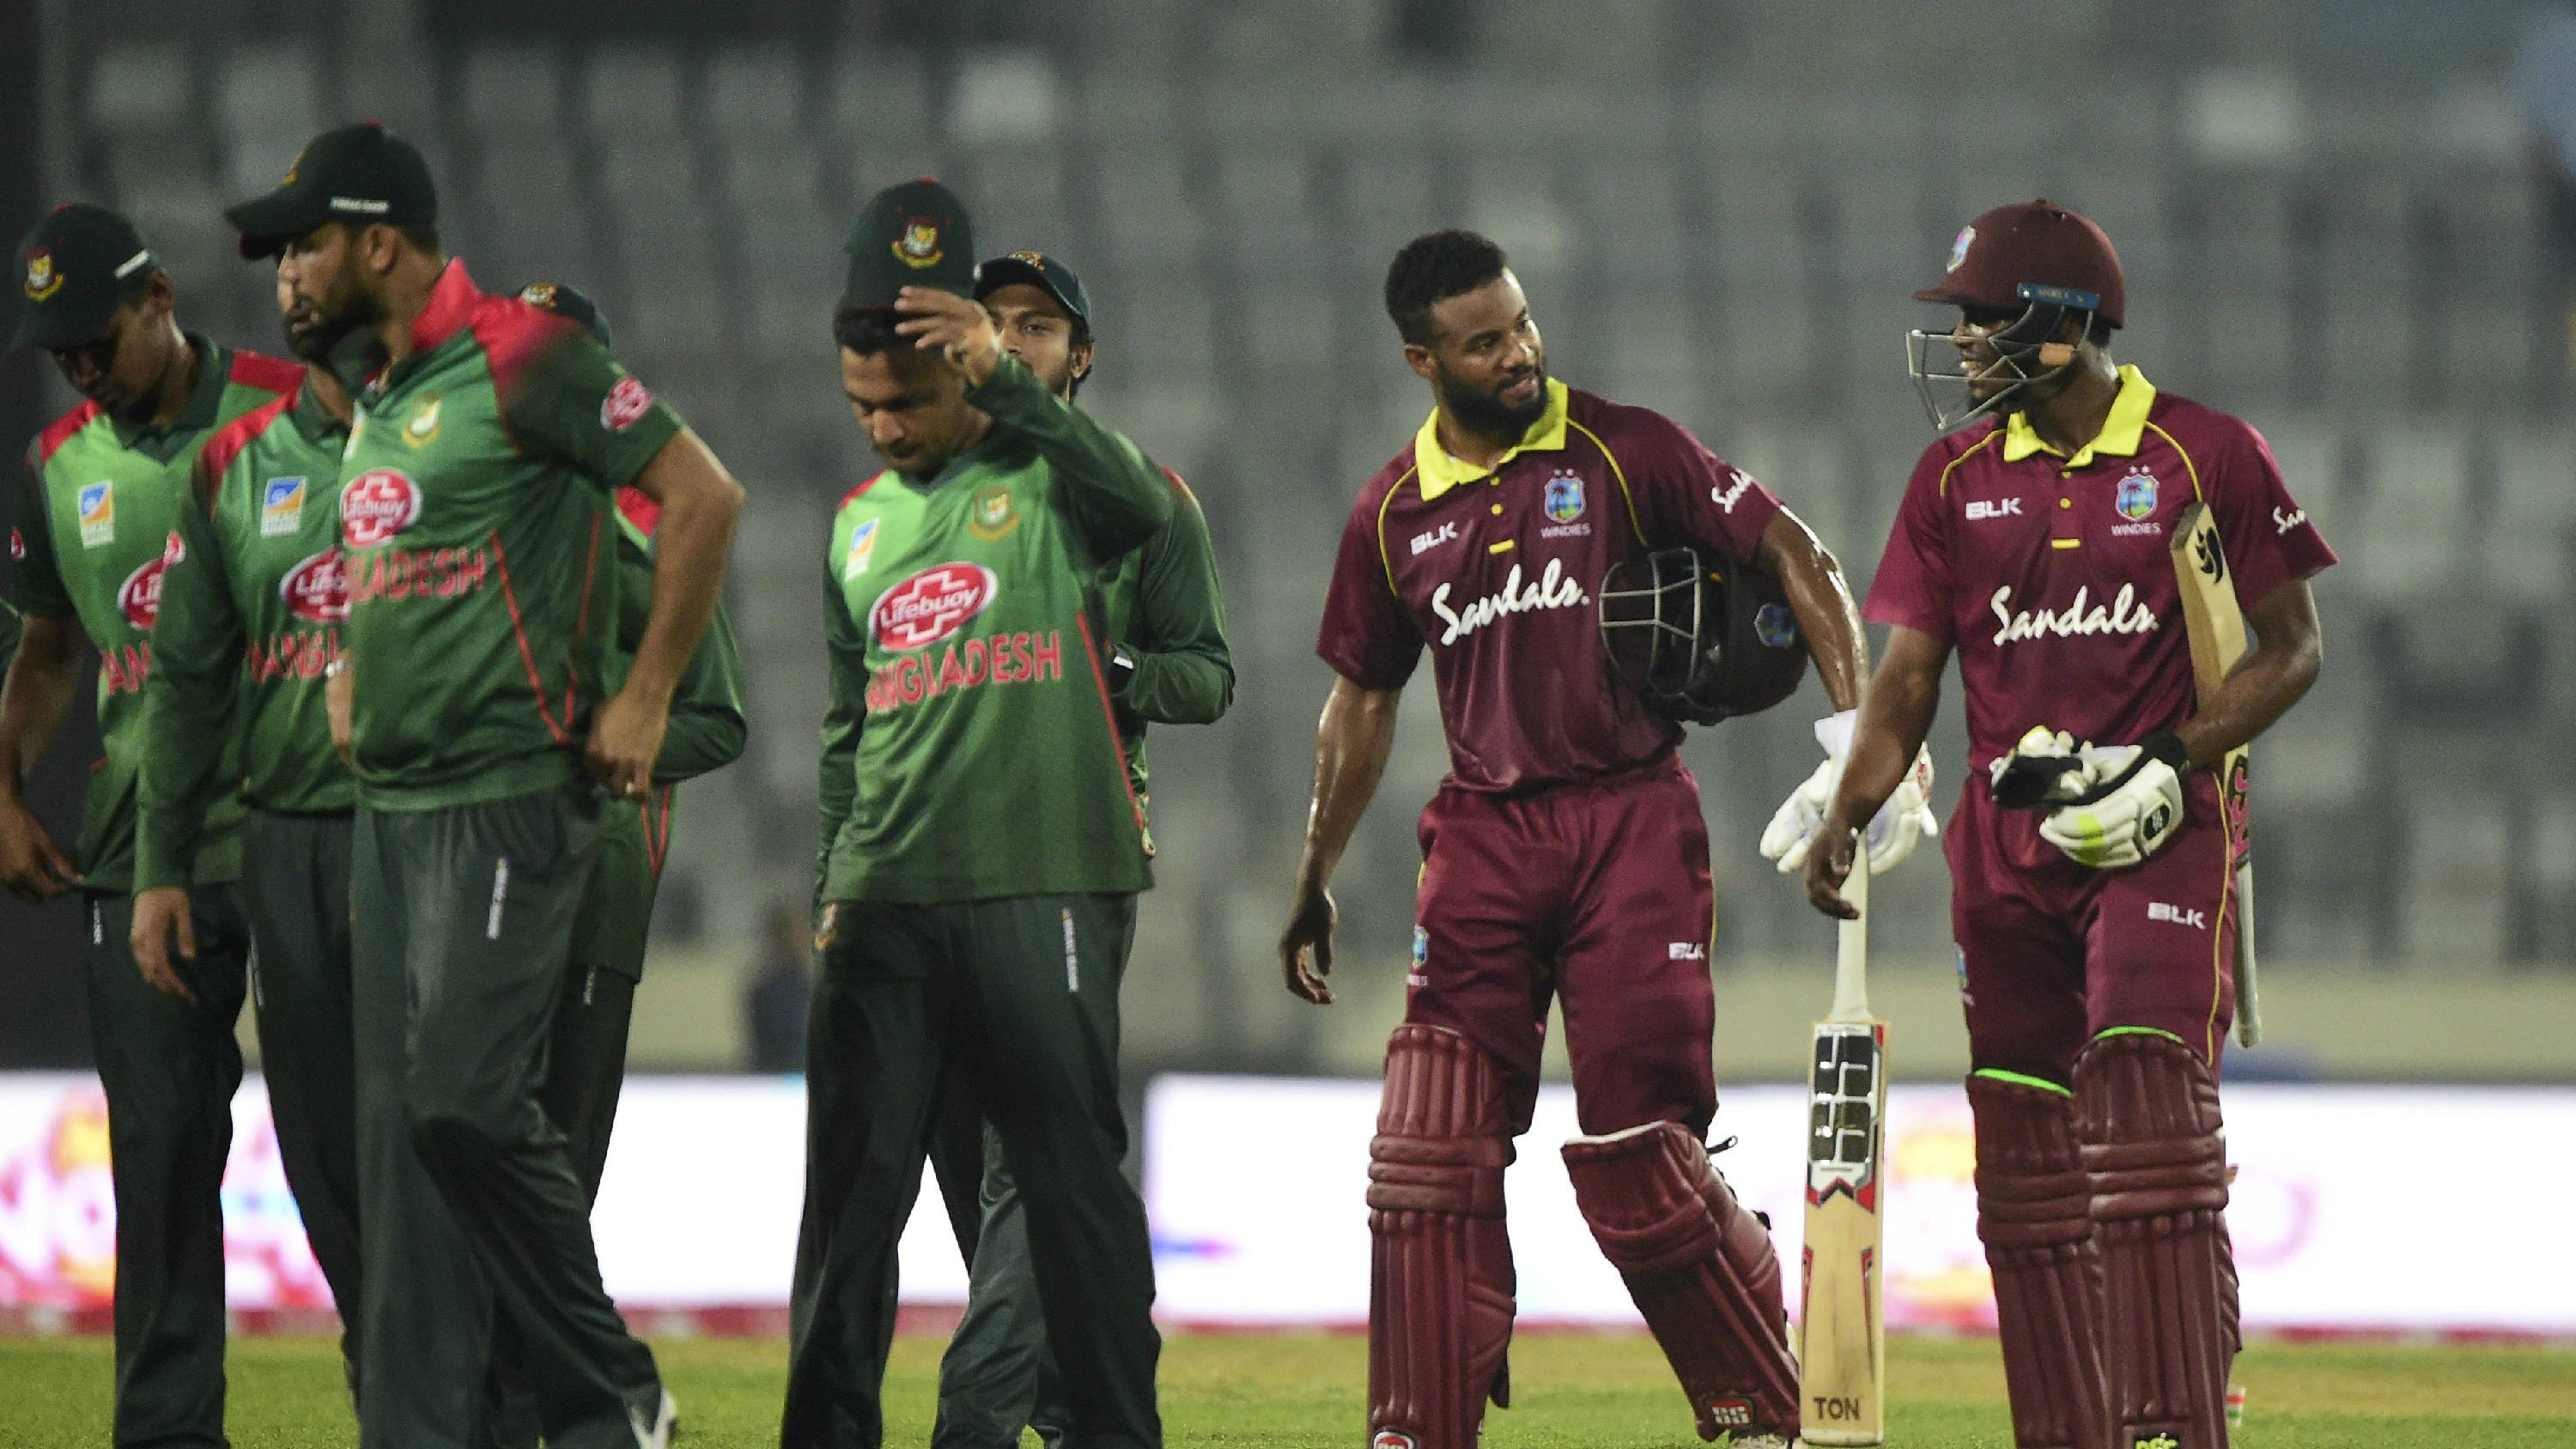 All to play for as Bangladesh, Windies aim for the series